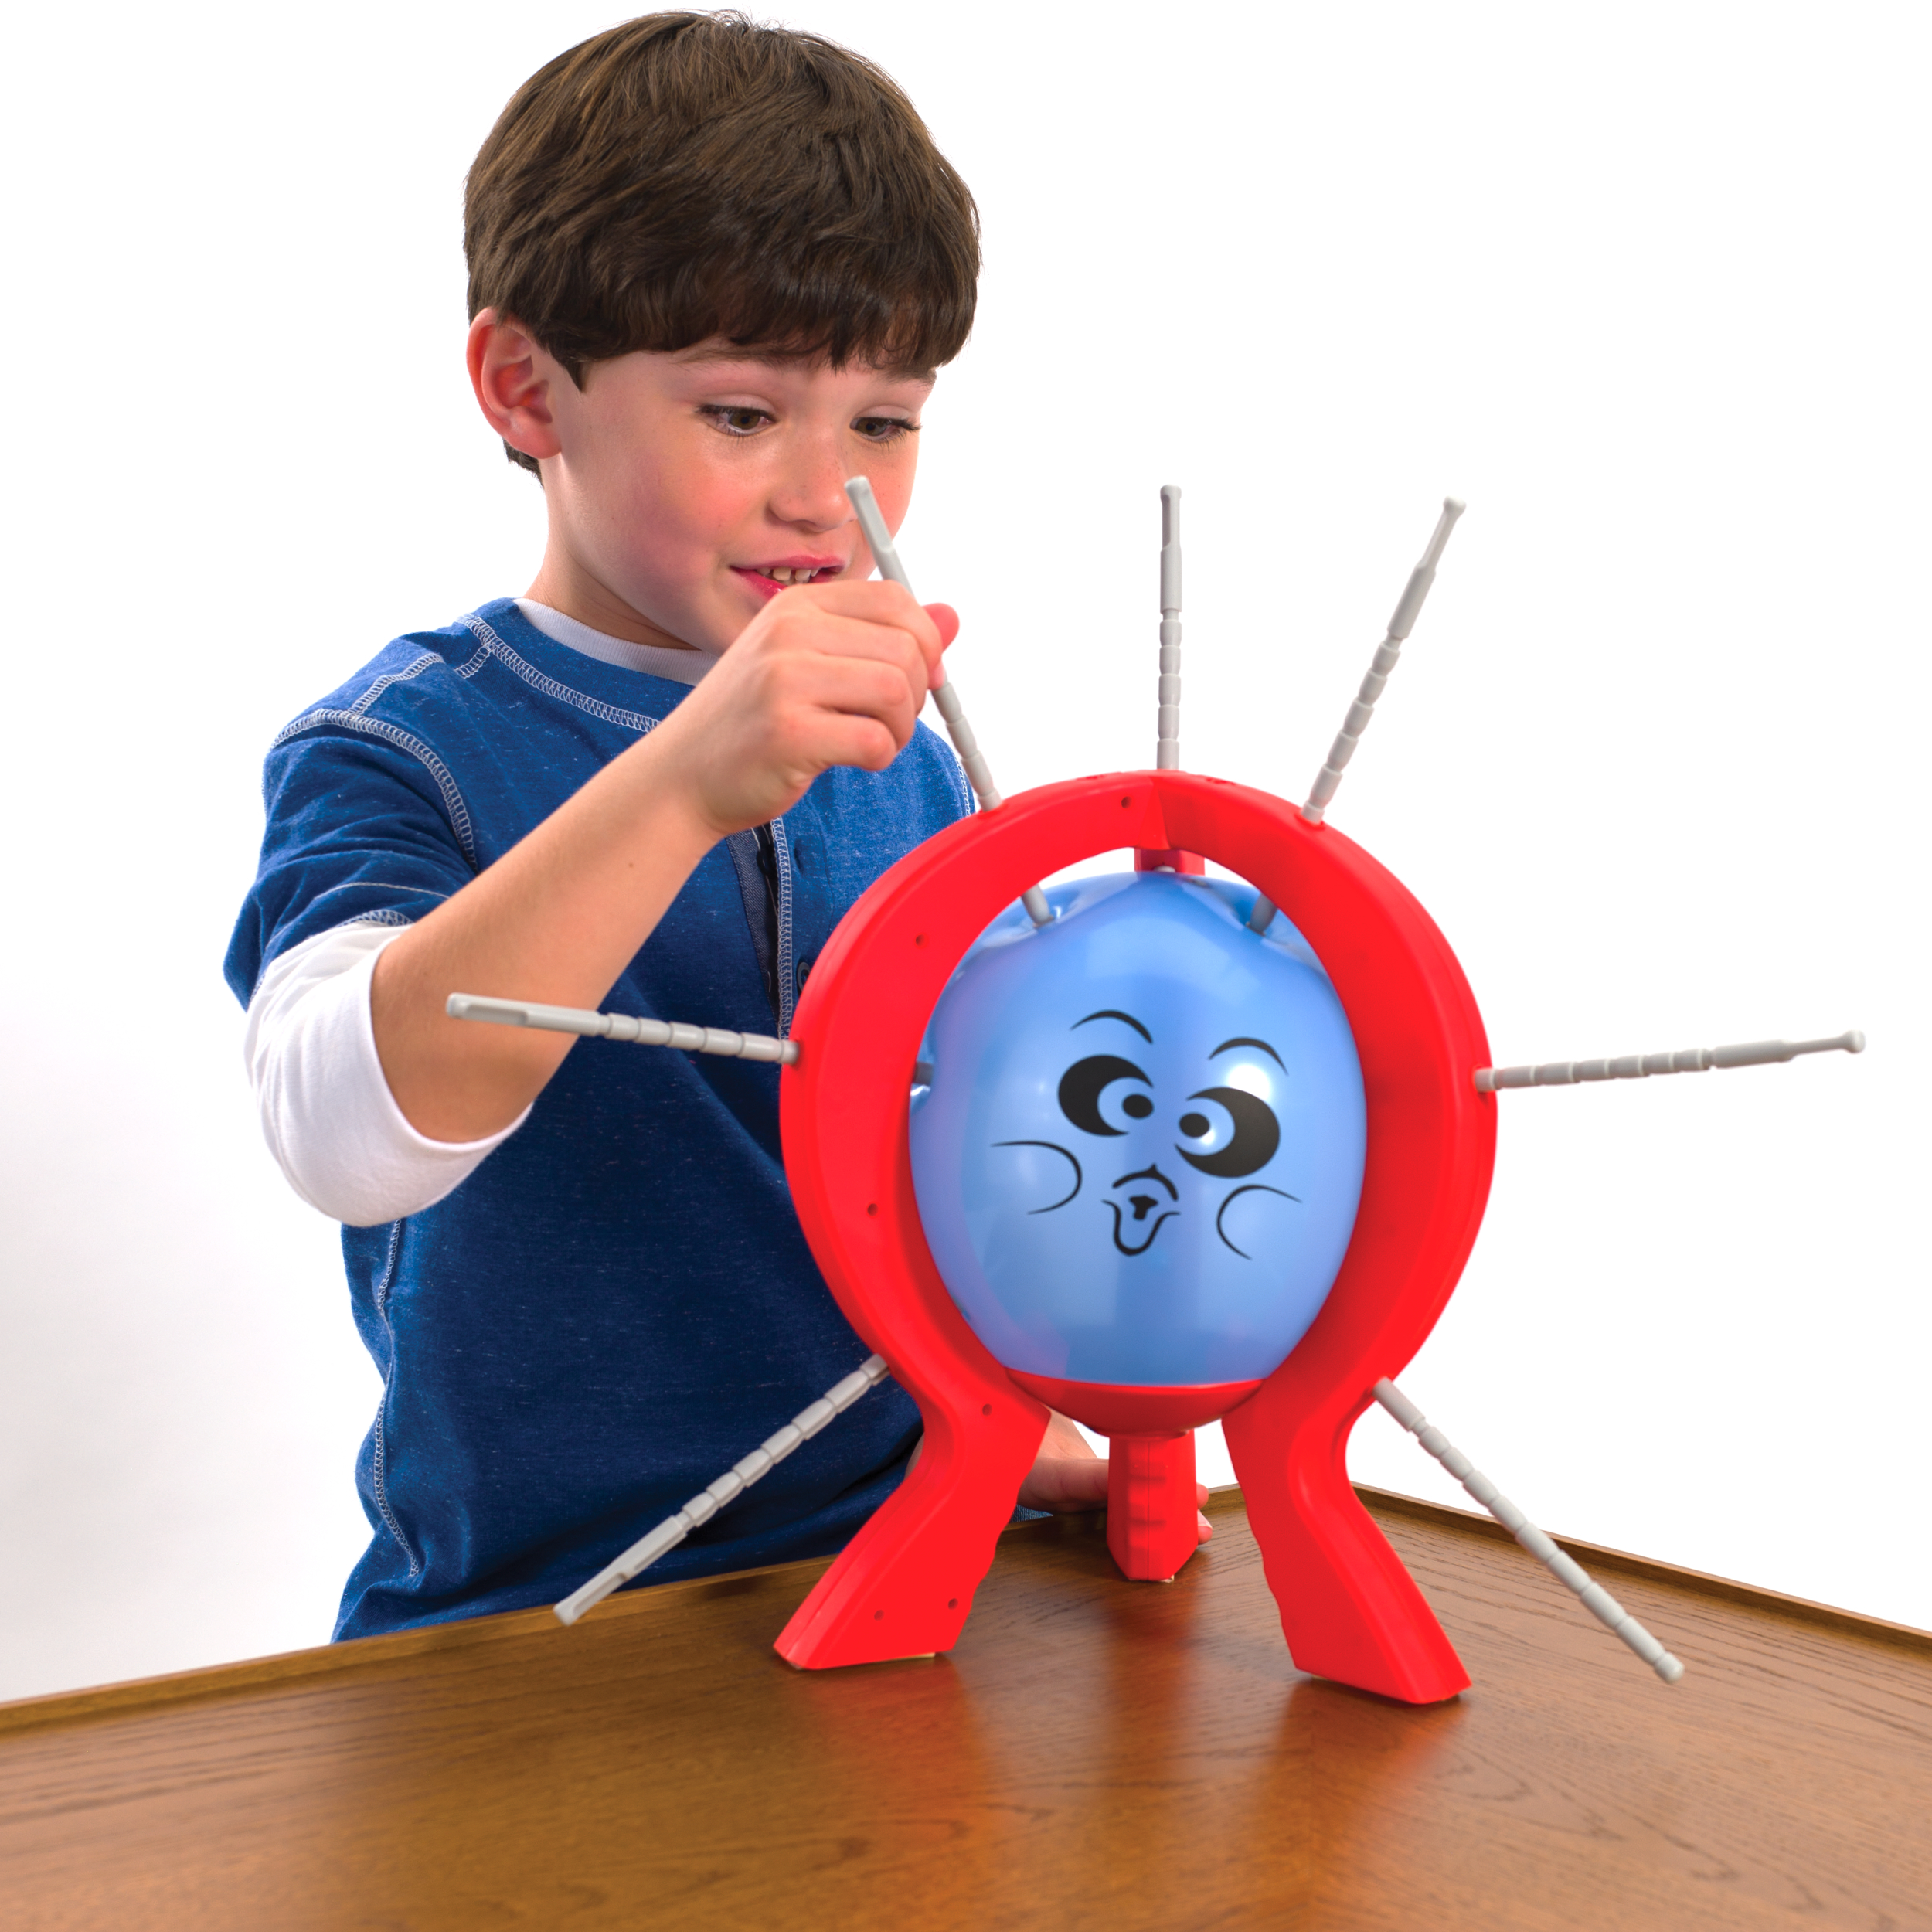 Boom Boom Balloon Game for Kids - image 4 of 5